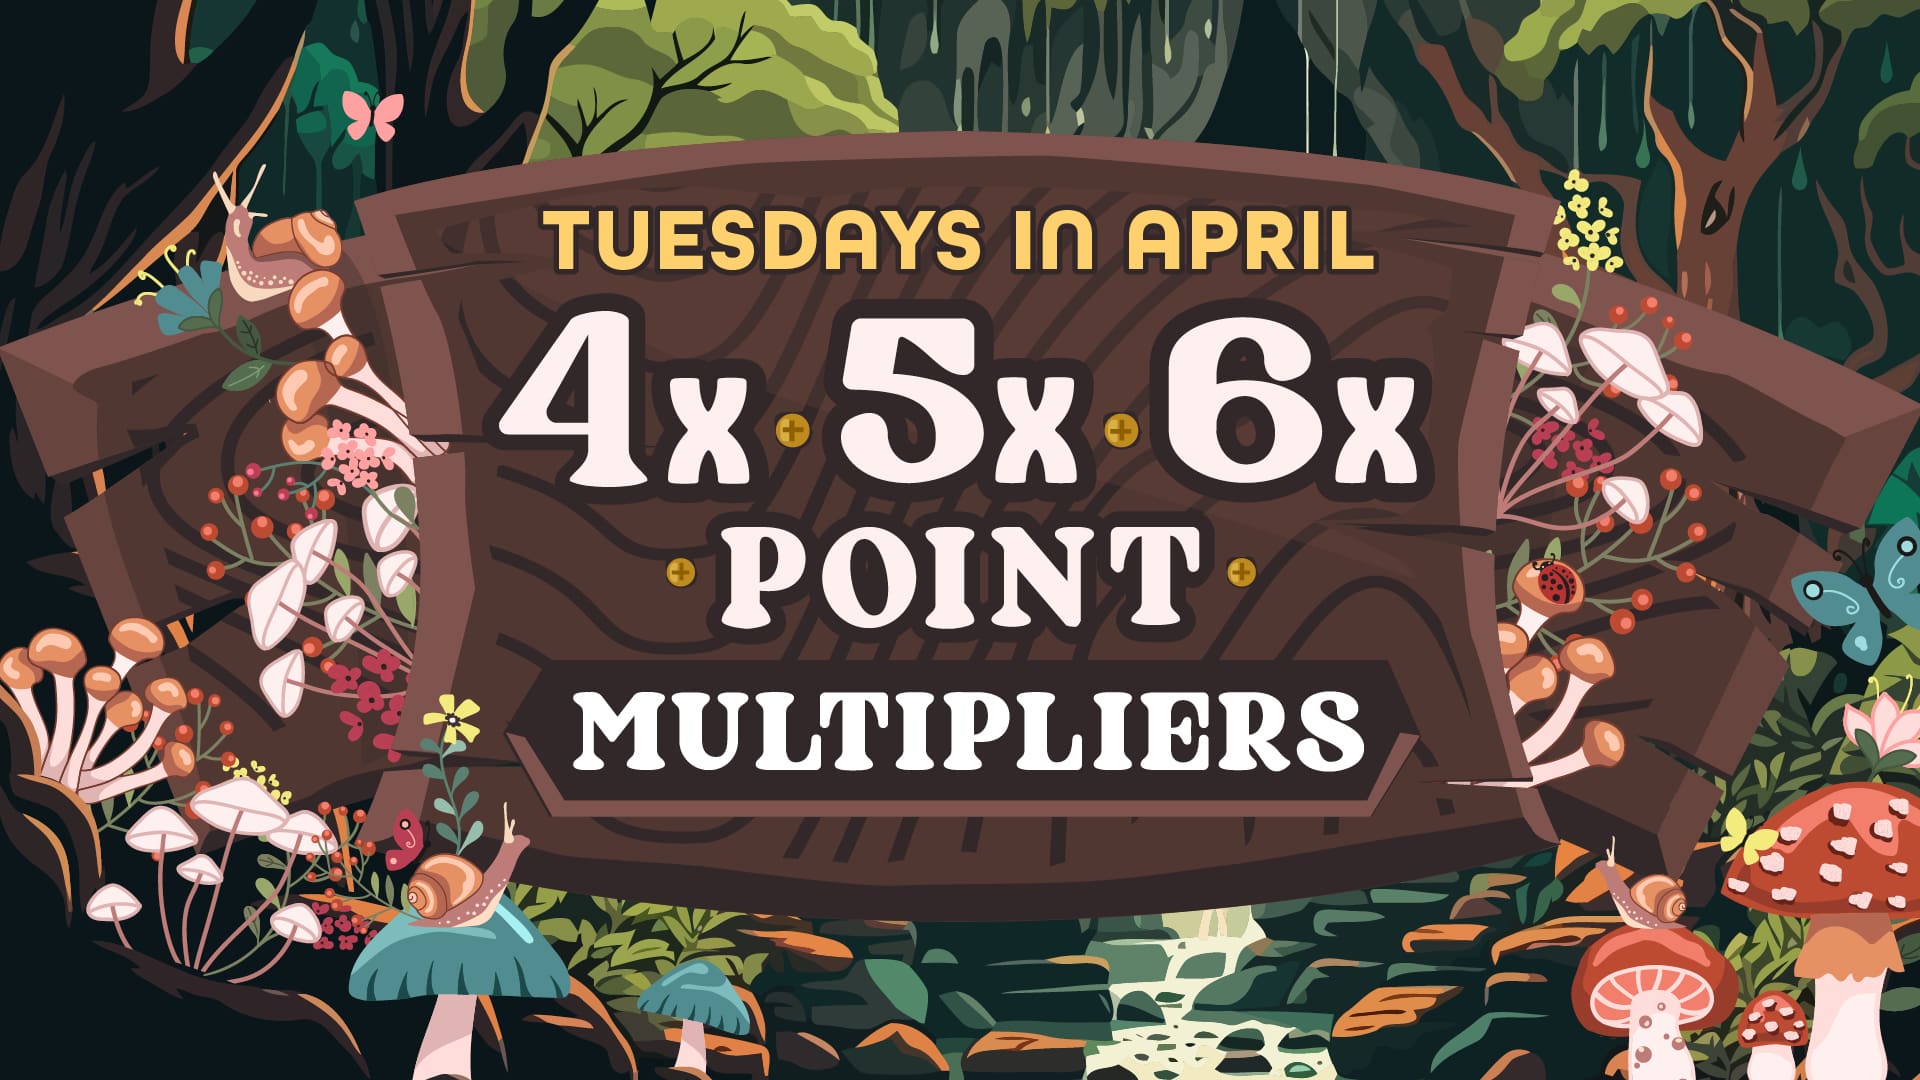 TUESDAY 4X 5X 6X POINT MULTIPLIERS